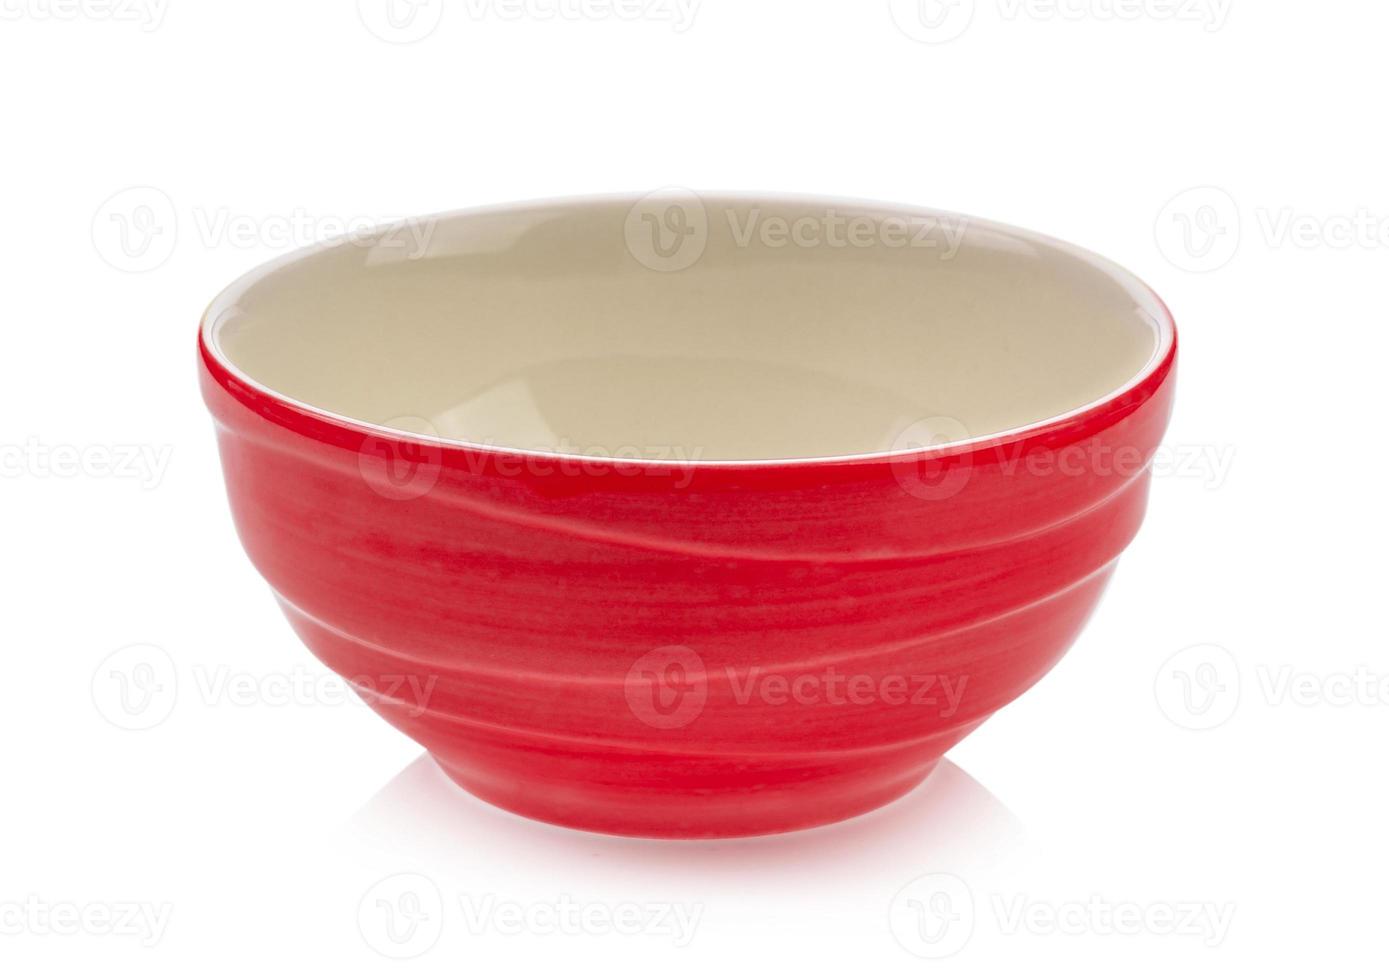 red bowl on white background photo